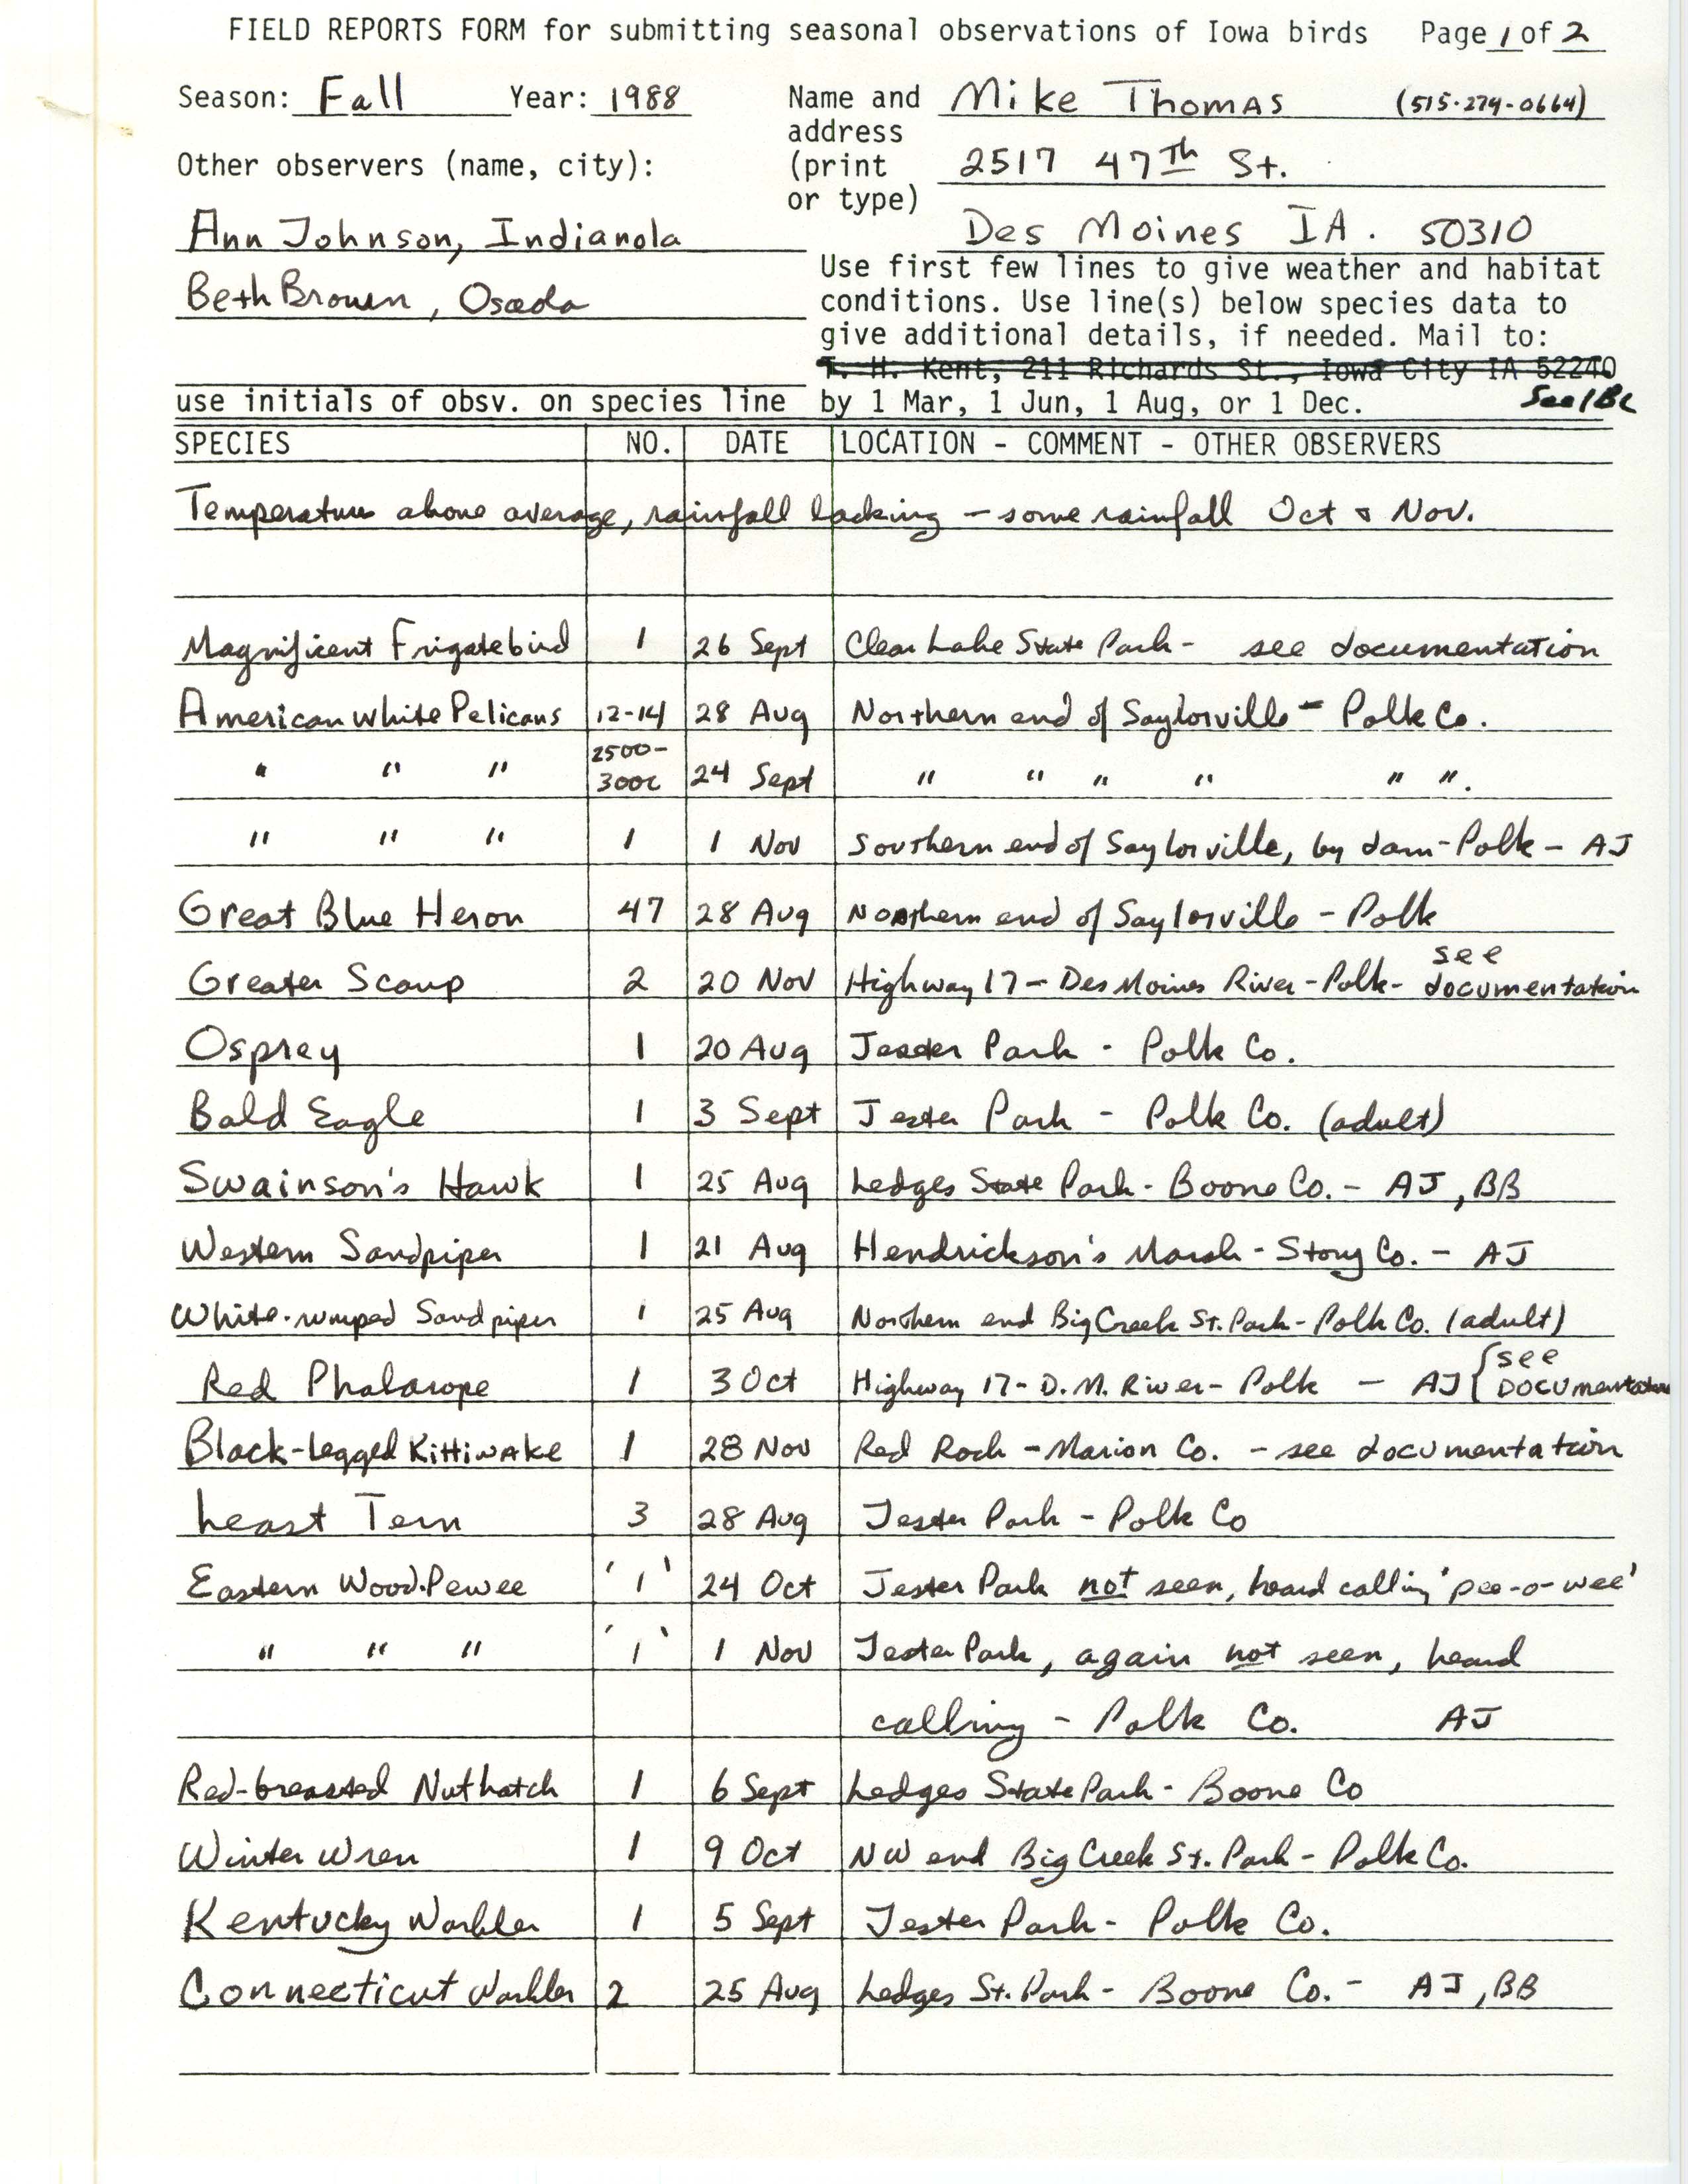 Field reports form for submitting seasonal observations of Iowa birds, Michael K. Thomas, fall 1988